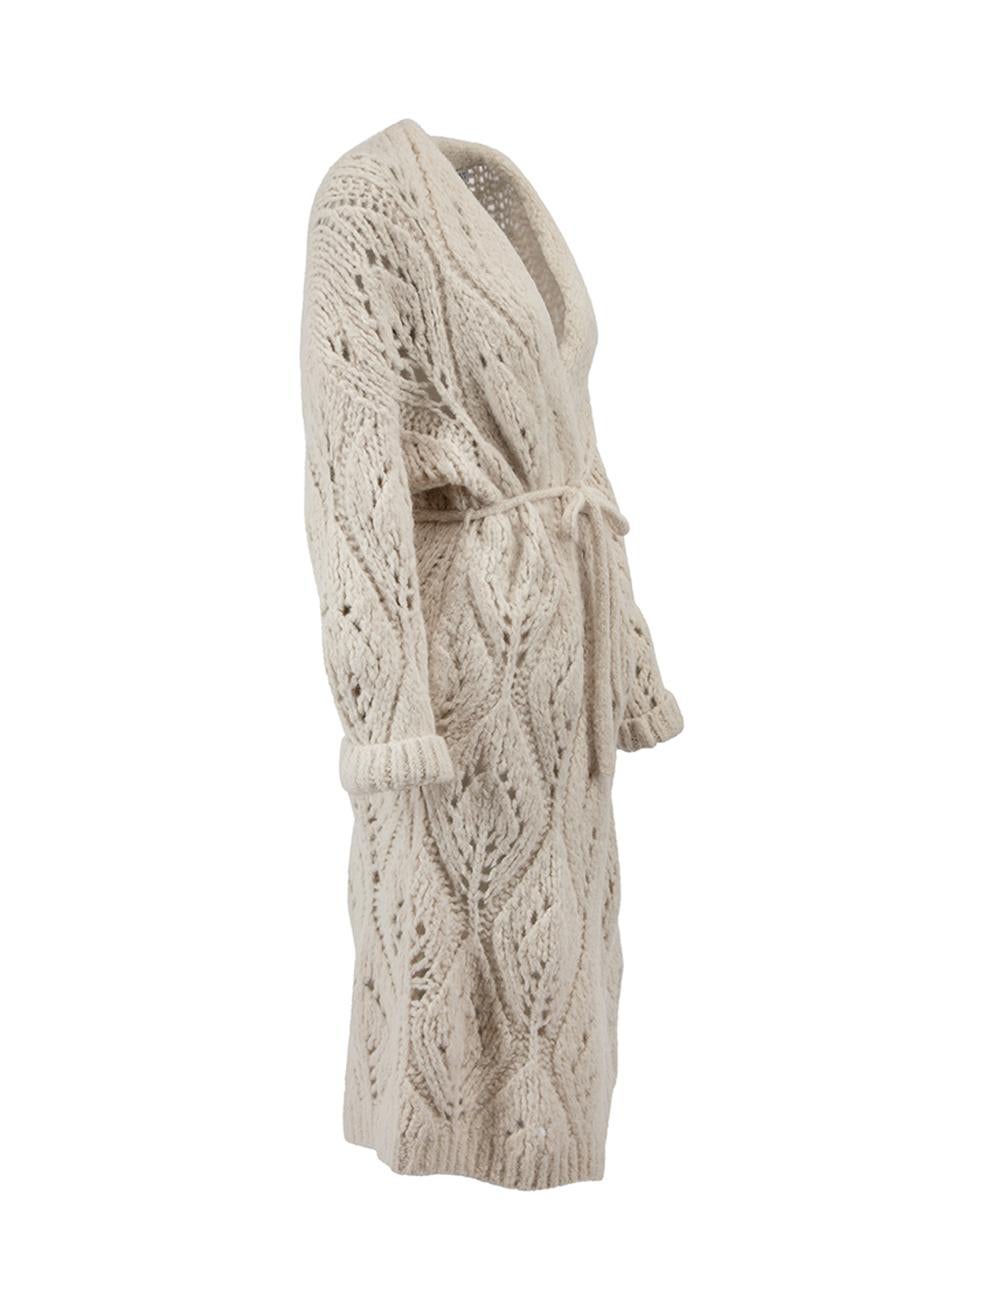 CONDITION is Very good. Hardly any visible wear to cardigan is evident on this used Brunello Cucinelli designer resale item.



Details


Cream

Alpaca wool

Long cardigan

Chunky loose knitted

Belted

Open front

Front side pockets with snap